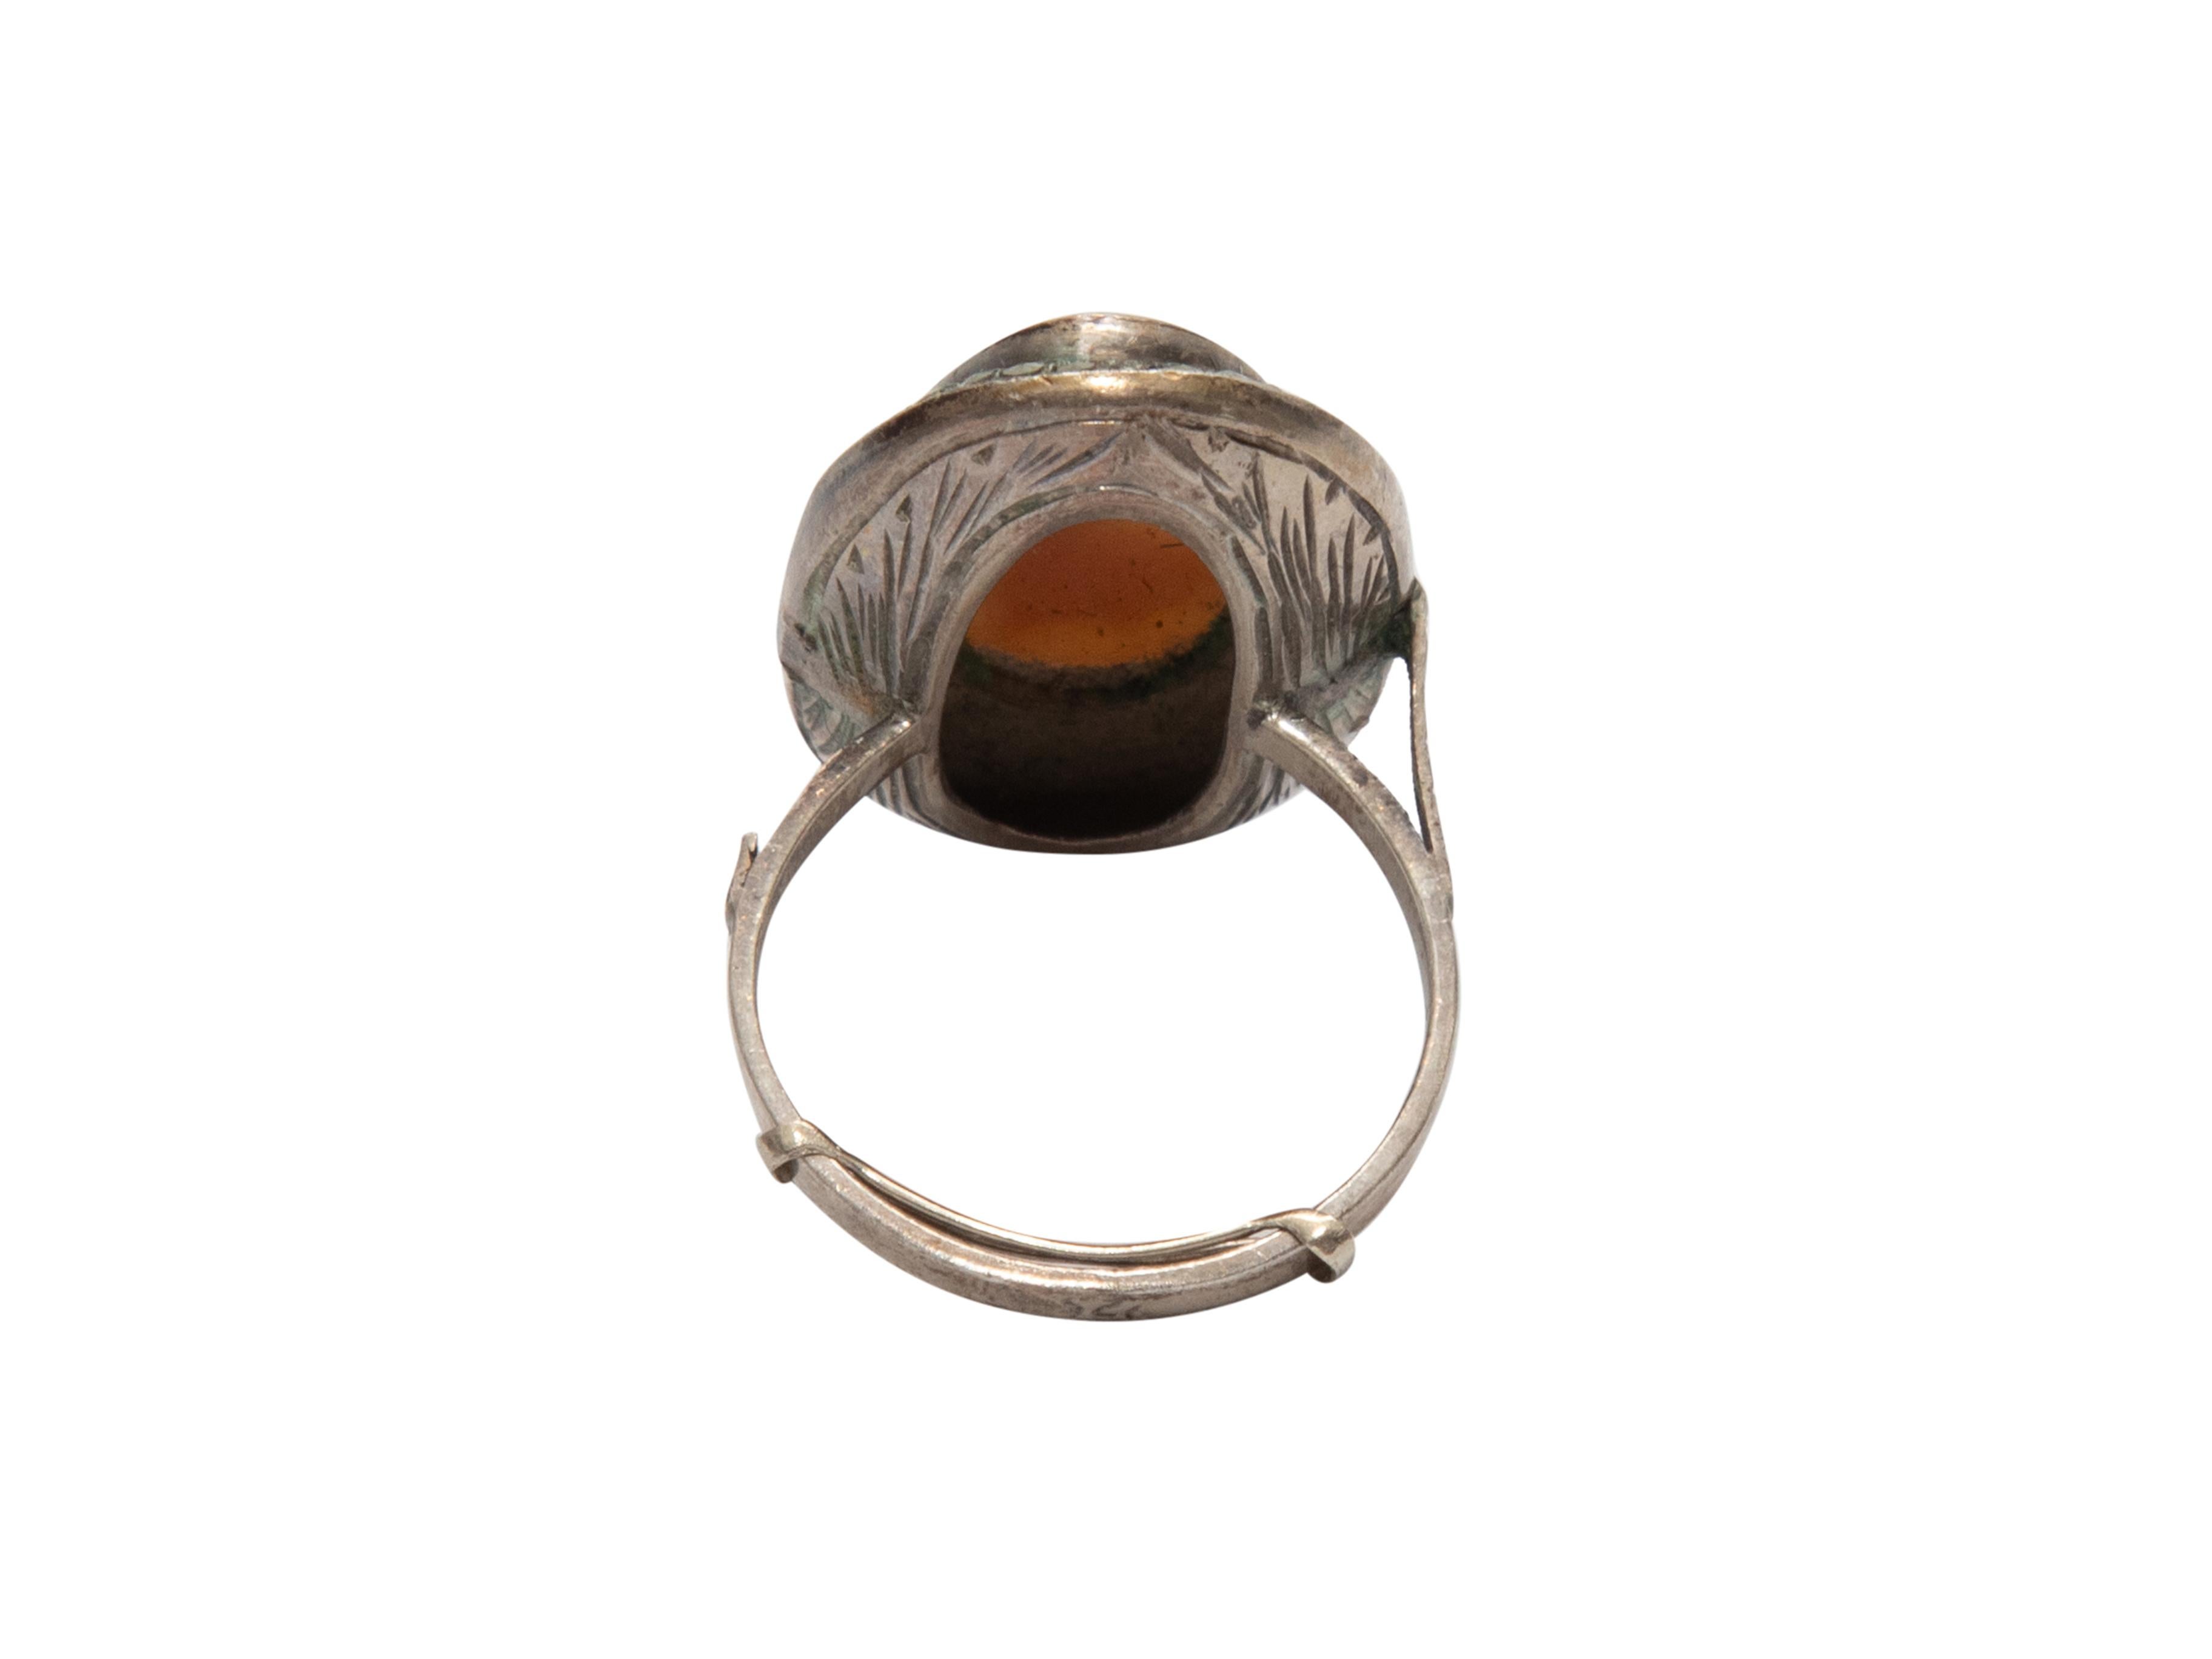 Vintage silver cameo shell ring. Moderate wear throughout. Missing one stone.

Vintage silver cameo shell ring. Moderate wear throughout. Missing one stone.

Vintage silver cameo shell ring. Moderate wear throughout. Missing one stone.

Vintage